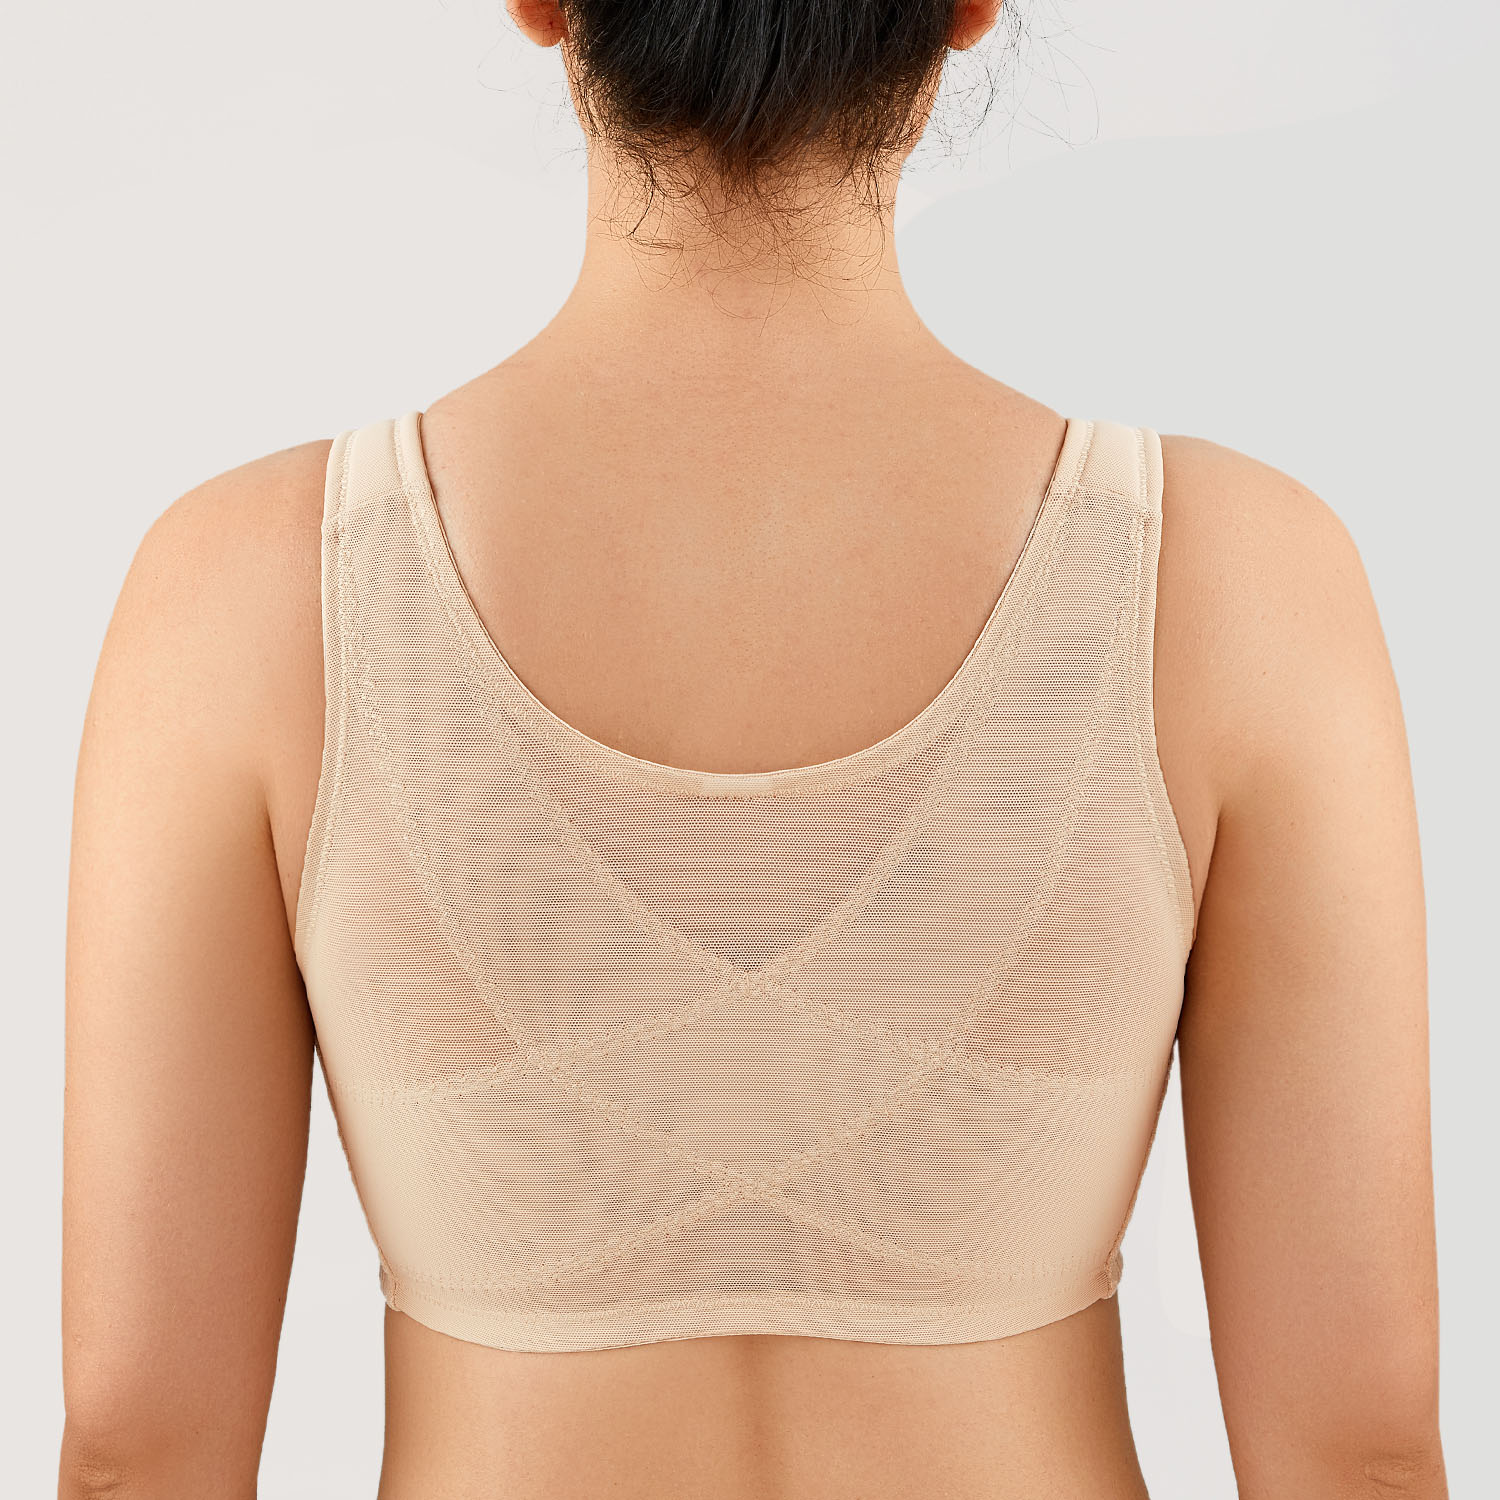 LAUDINE Women S Full Coverage Front Closure Bra Wire Free Back Support Posture EBay